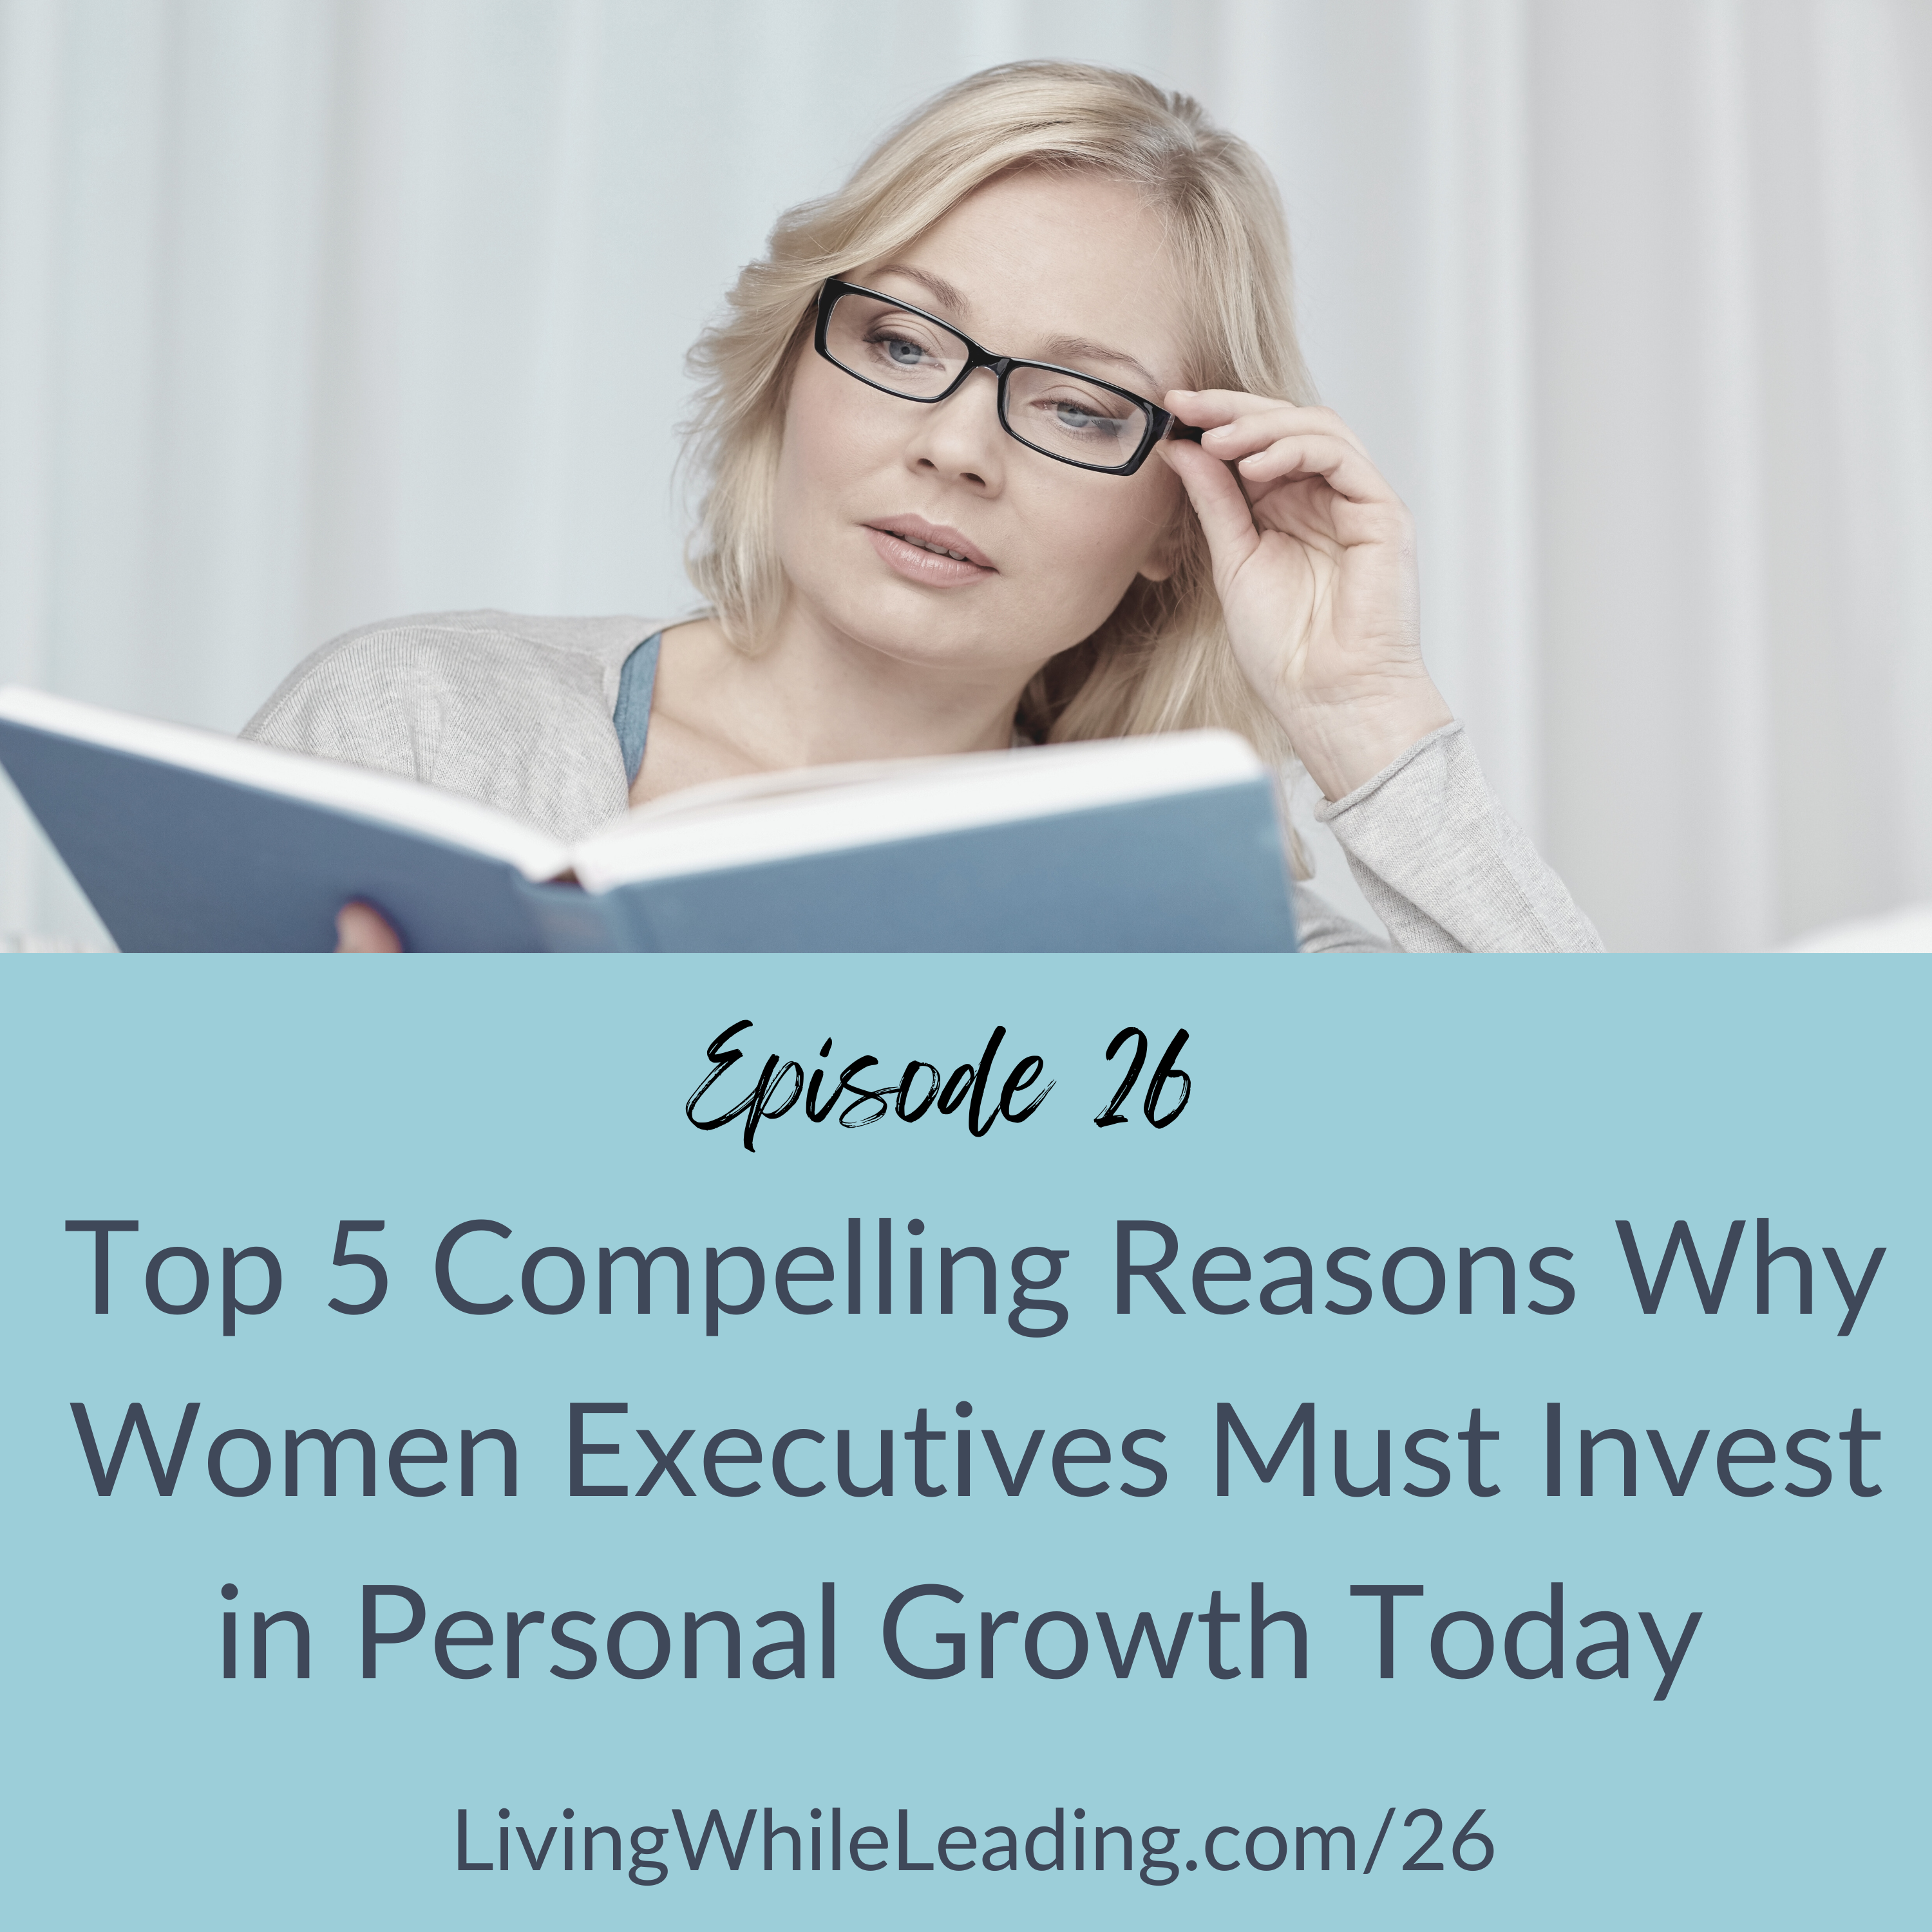 The image features a middle-aged women with blonde hair and glasses. She is reading a book and has her head titled a bit to the side. The text reads: episode 26, Top 5 Compellign Reasons Why Women Executives Must Invest in Personal Growth Today, LivingWhileLeading.com/26